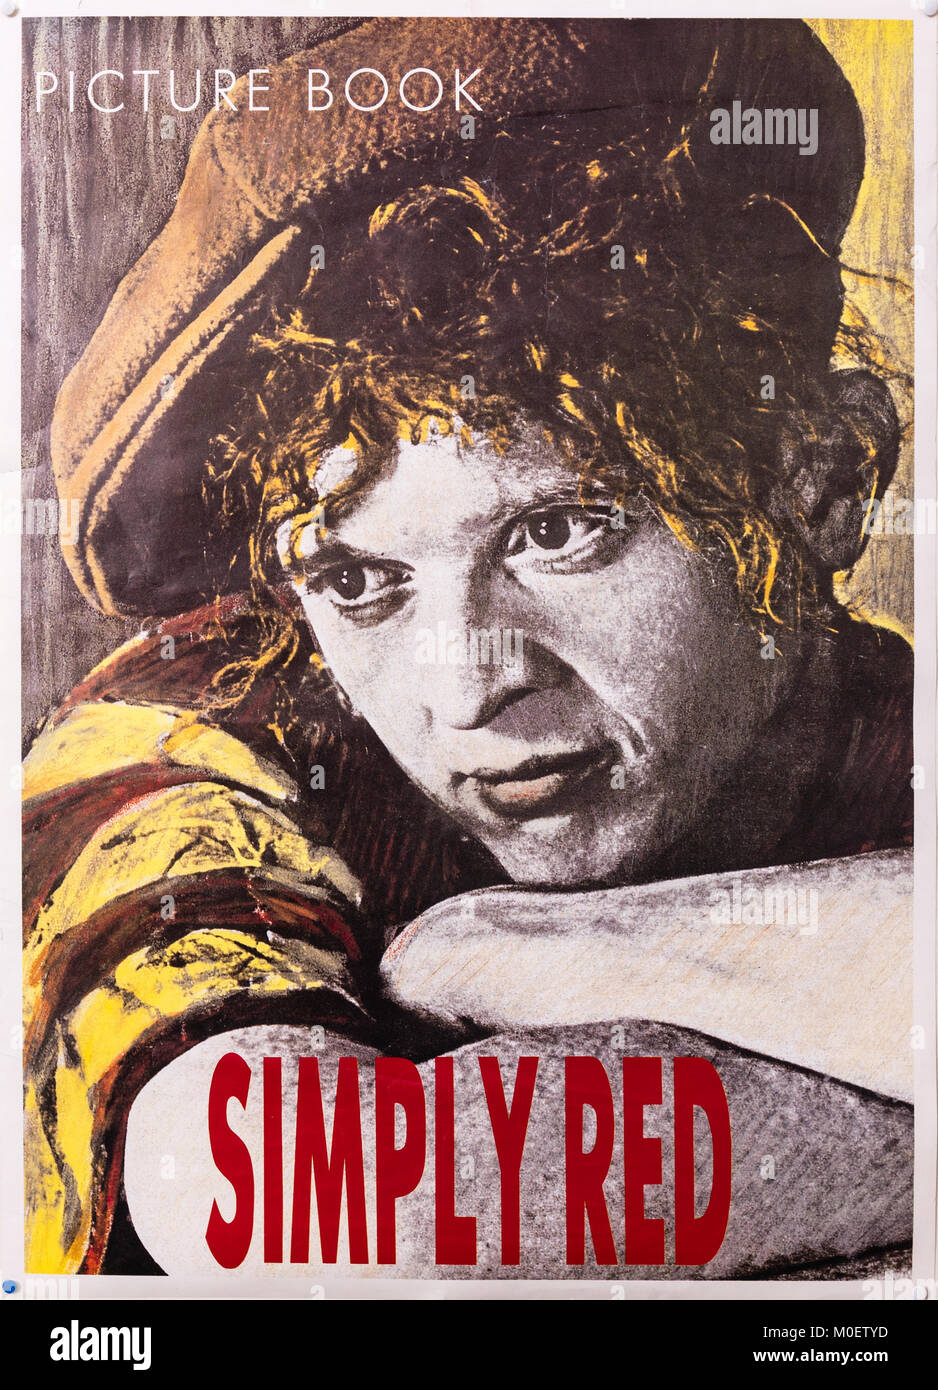 Simply Red Picture Book Werbe Poster. Musical Konzert Poster Stockfoto